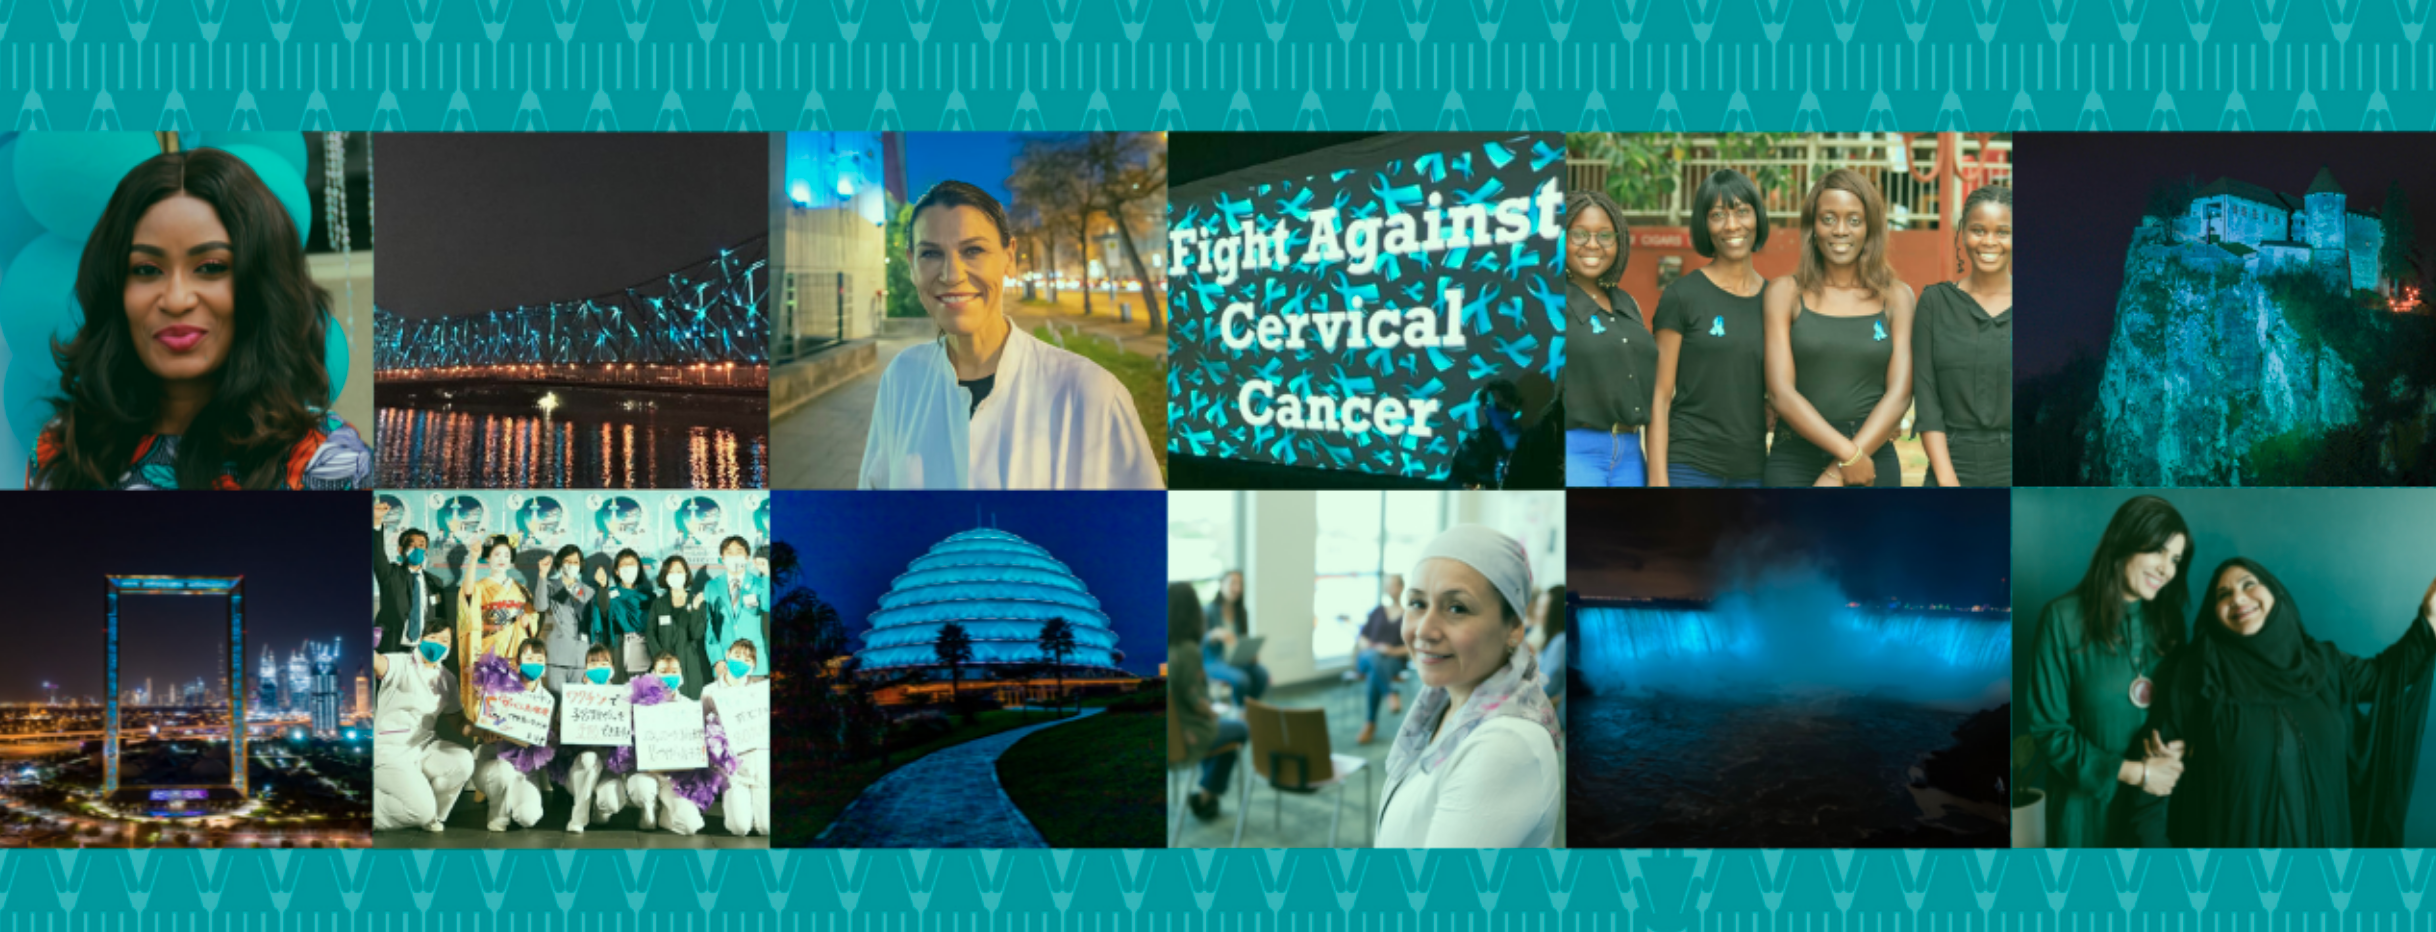 Global leaders call for cervical cancer elimination on Day of Action